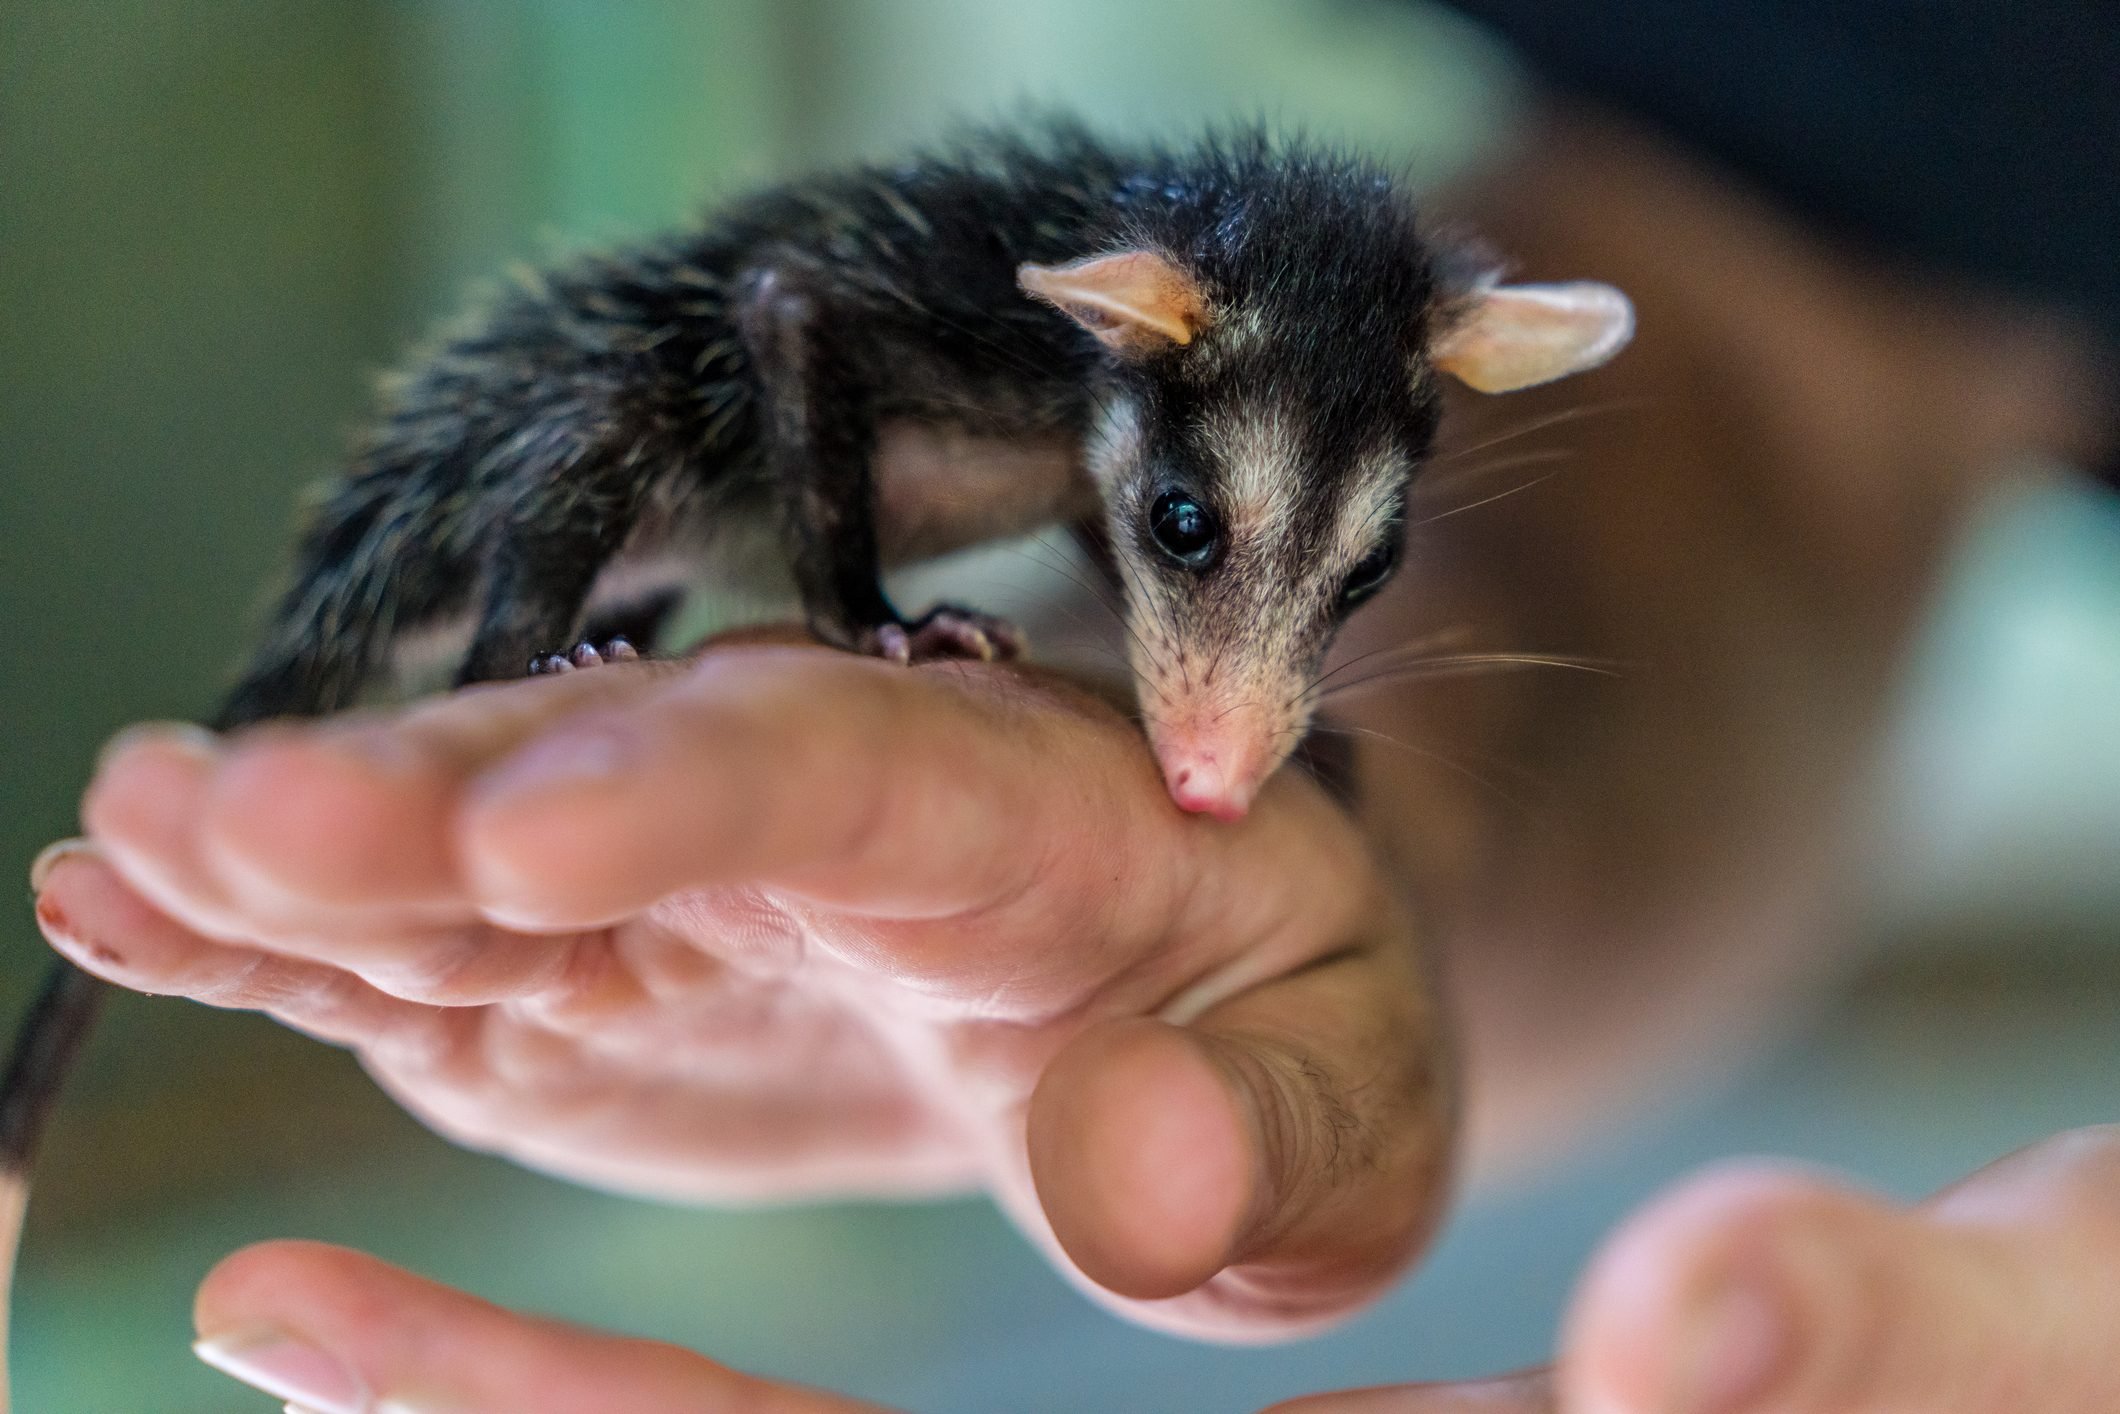 A cute baby opossum (Didelphidae) standing on man's hand